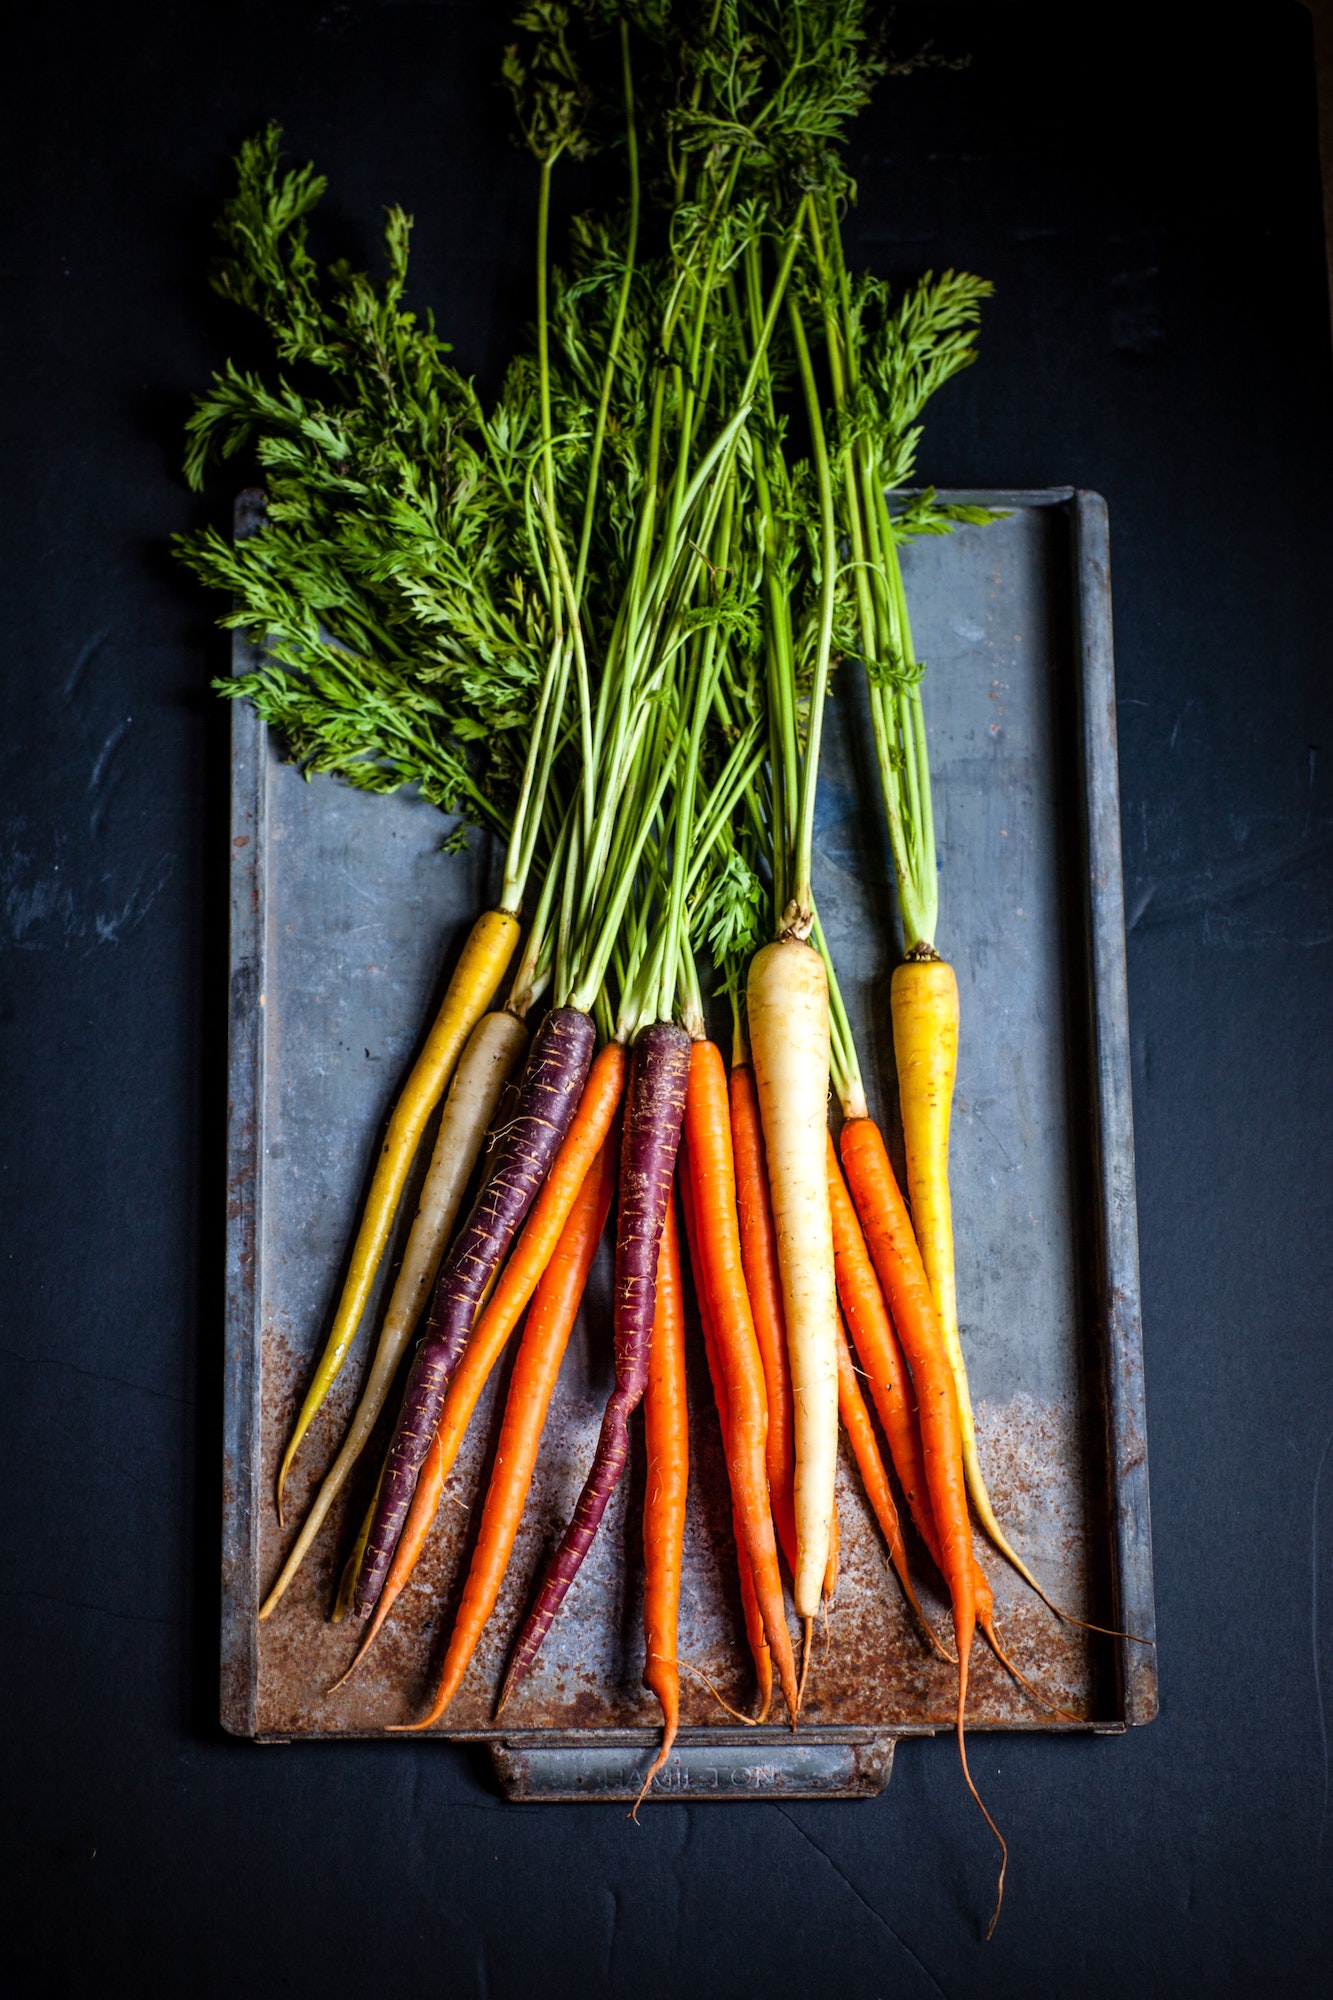 Root vegetables create the foundations and building blocks of some outstanding combinations